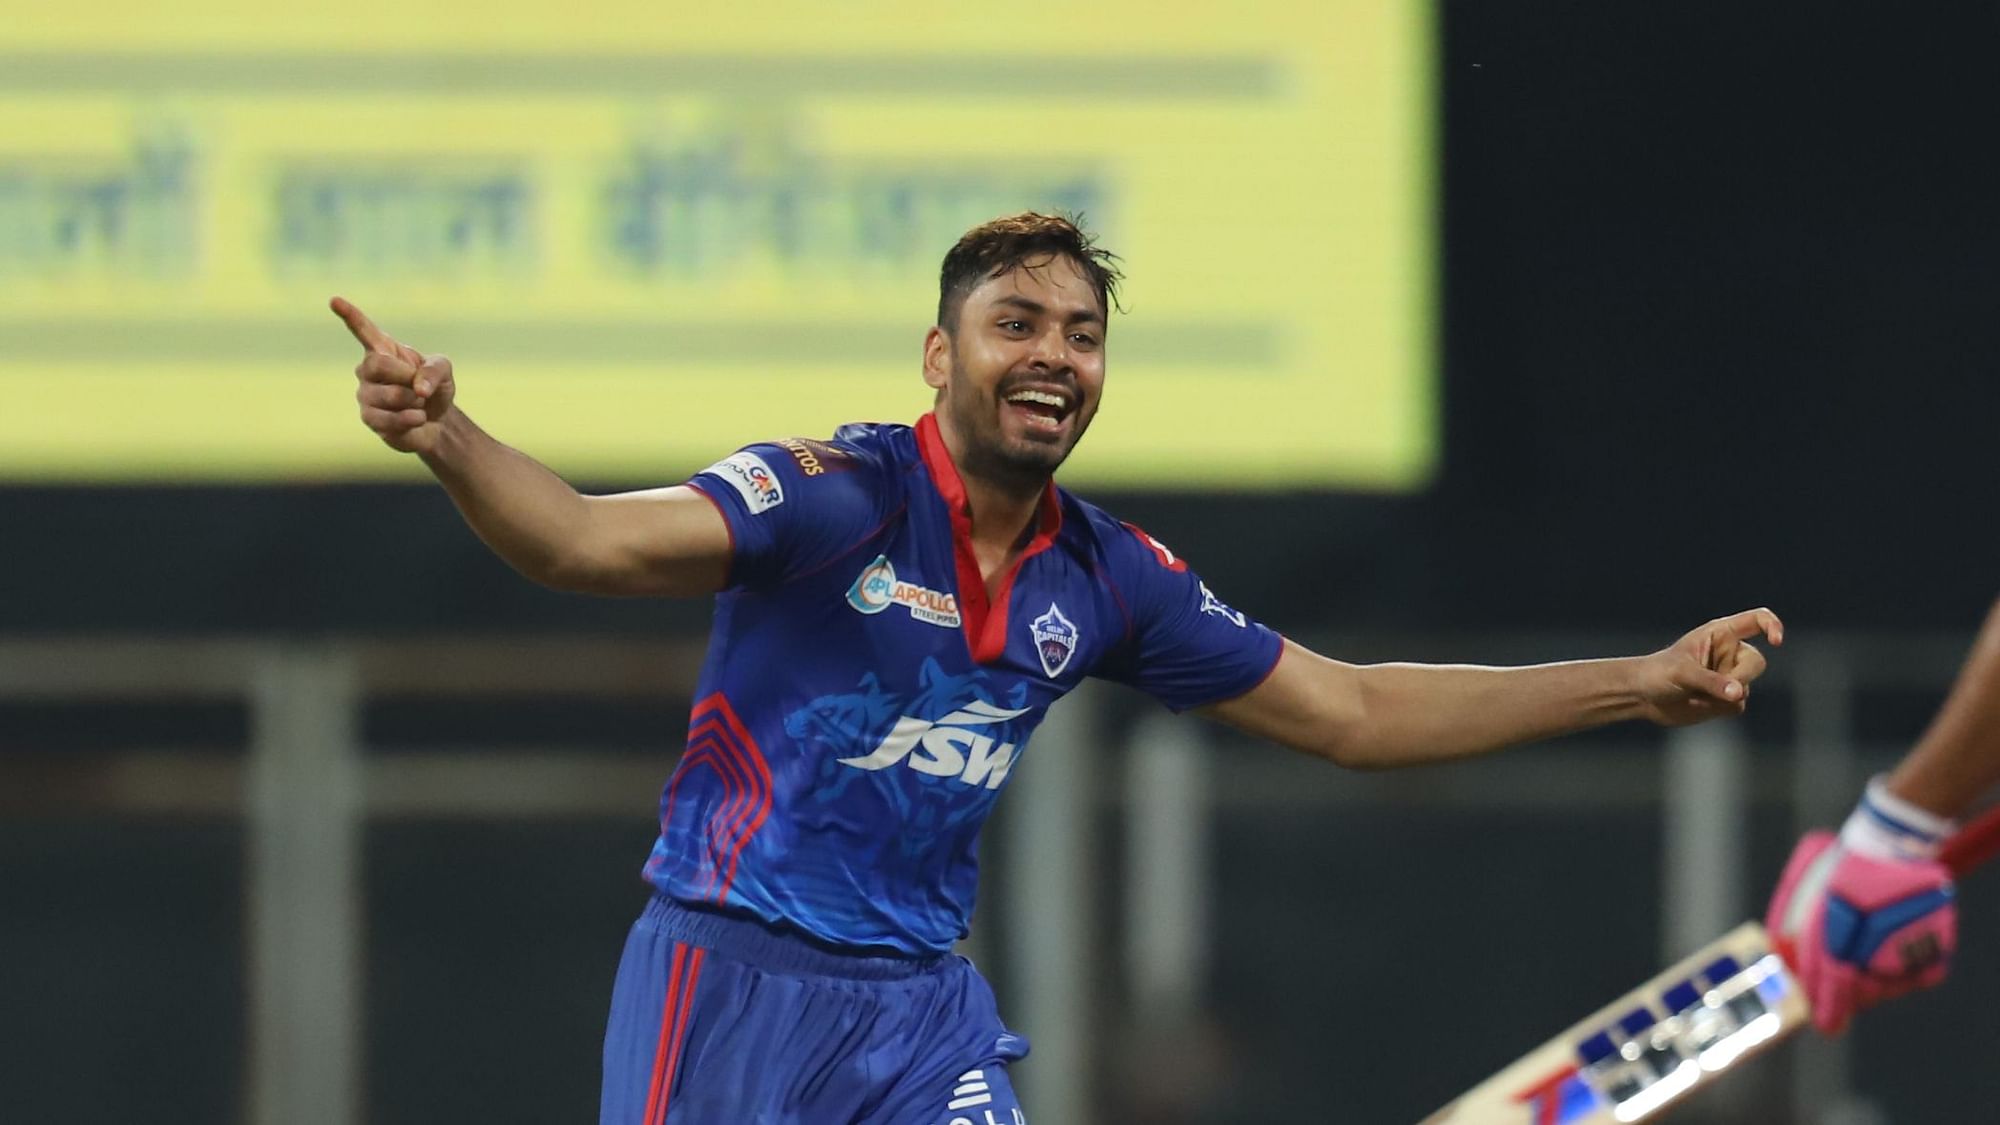 Avesh Khan of Delhi Capitals celebrates the wicket of Shivam Dube of Rajasthan Royals during match 7 of the Vivo Indian Premier League 2021.